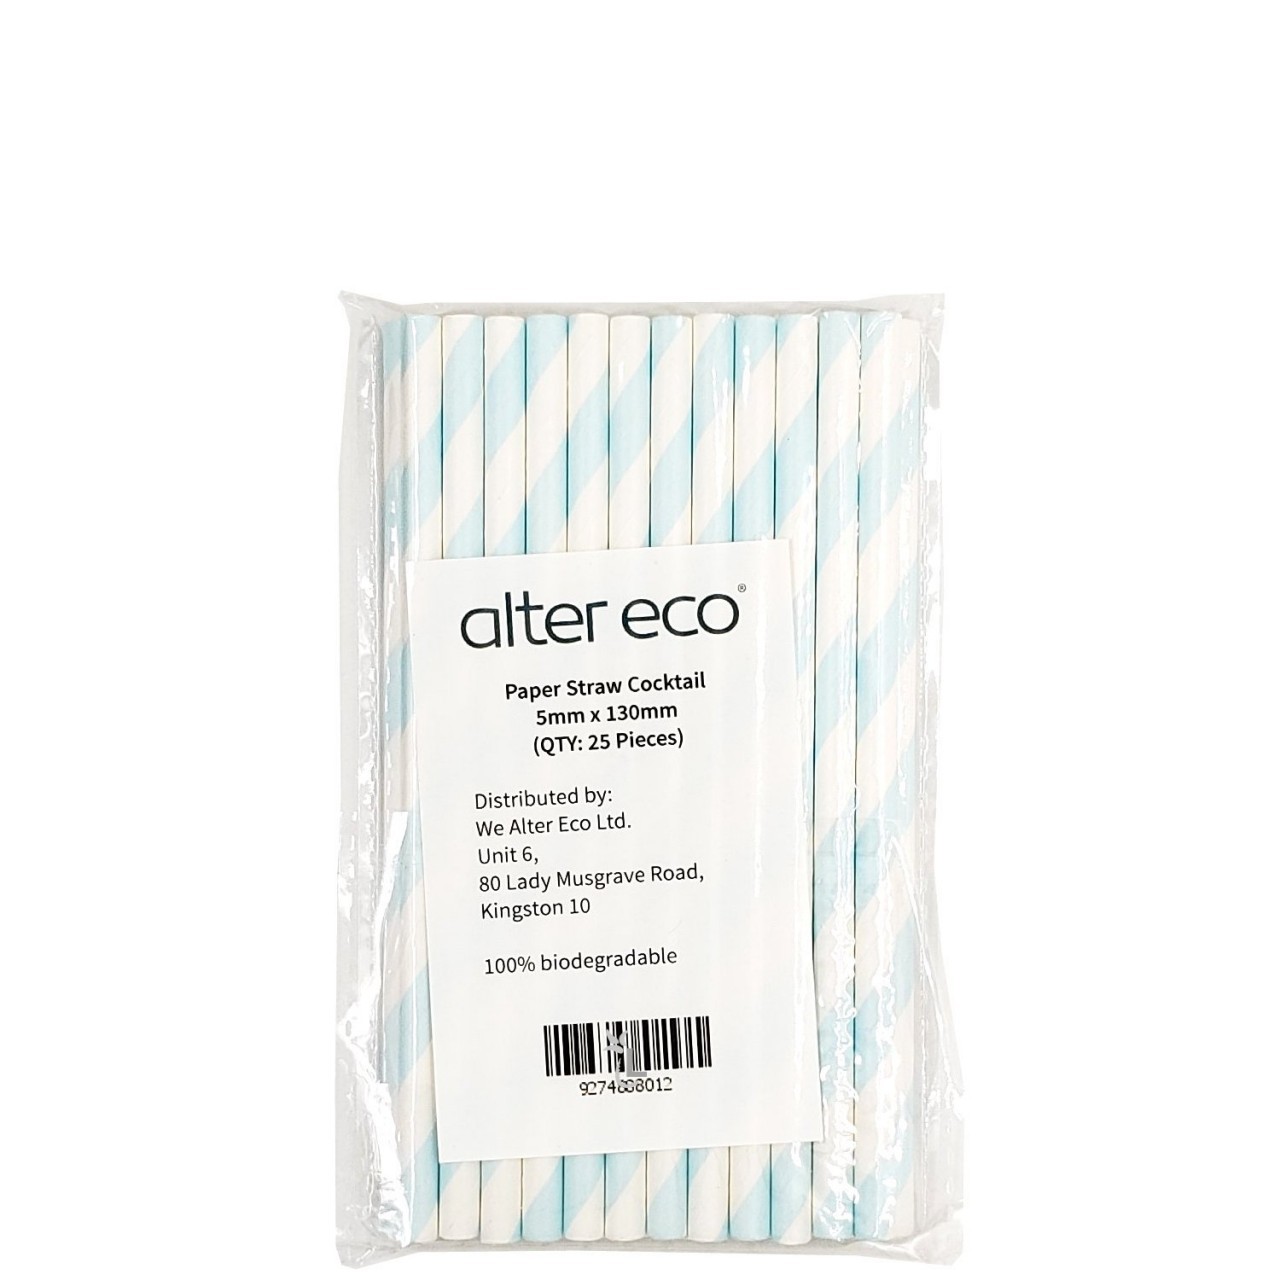 ALTER ECO PAPER STRAW COCKTAIL 25ct